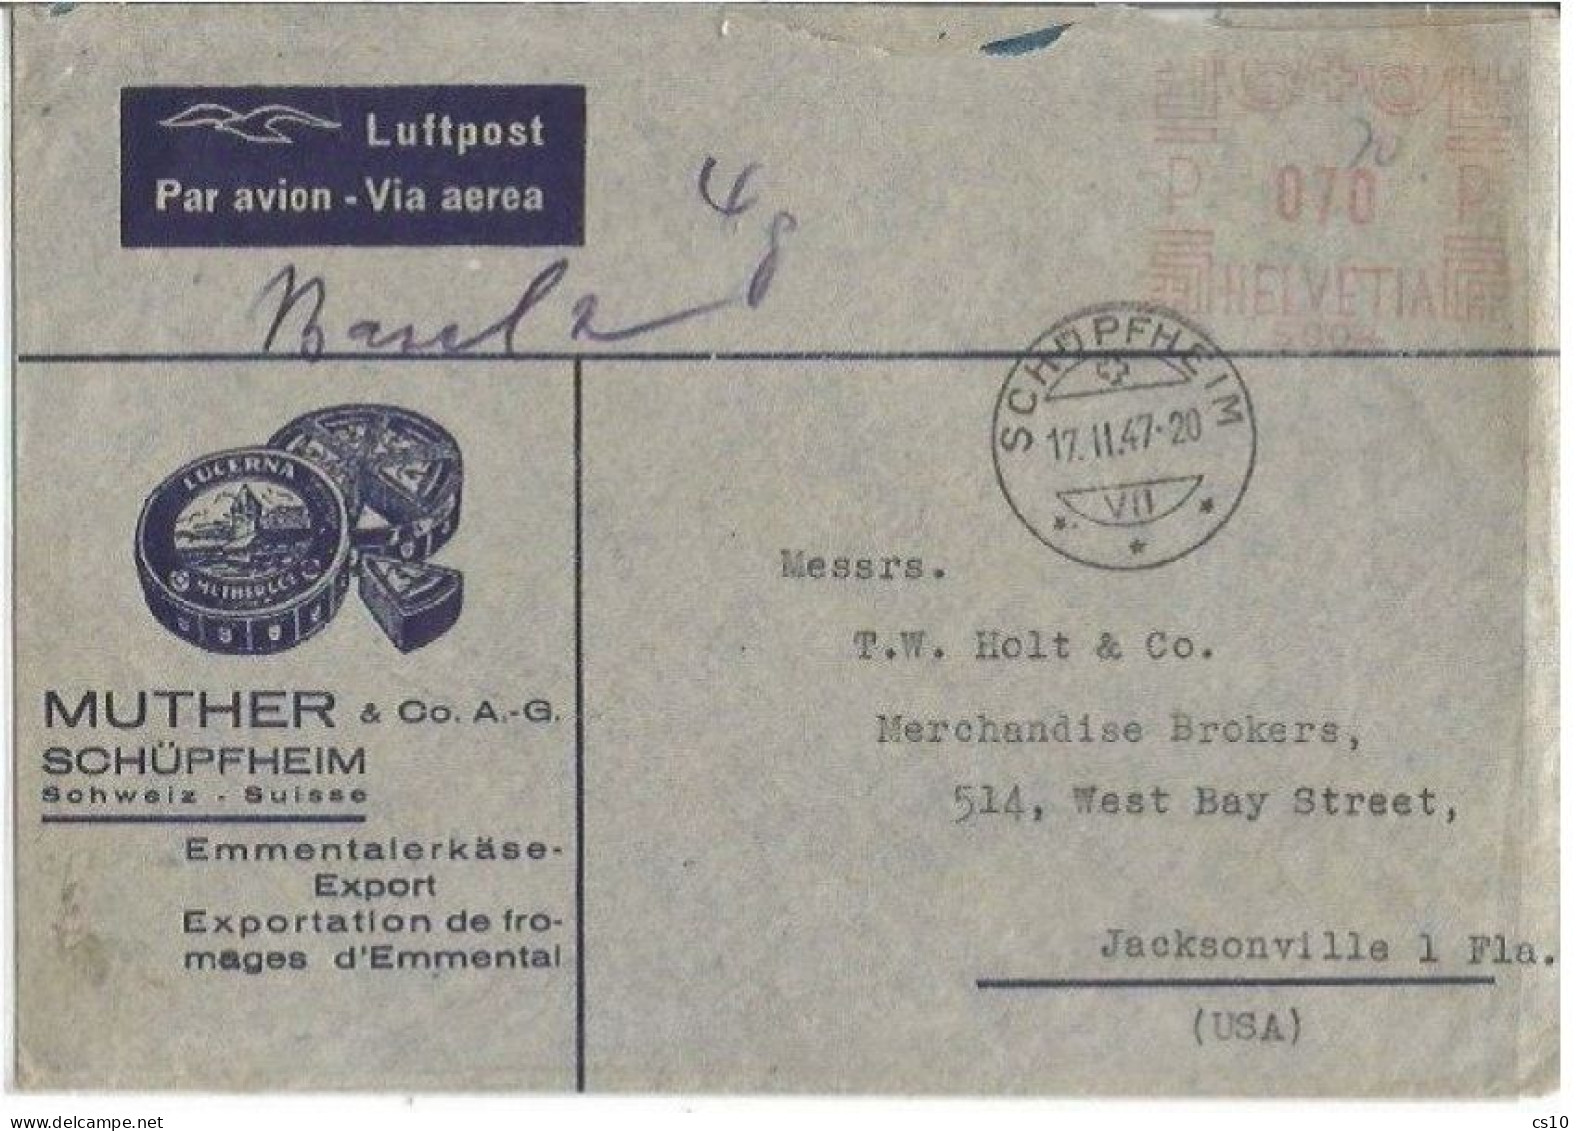 Suisse Commerce Emmental Cheese AirmailCV Schupfheim 17feb1947 To USA With Red Meter Franking C.70 - Alimentación